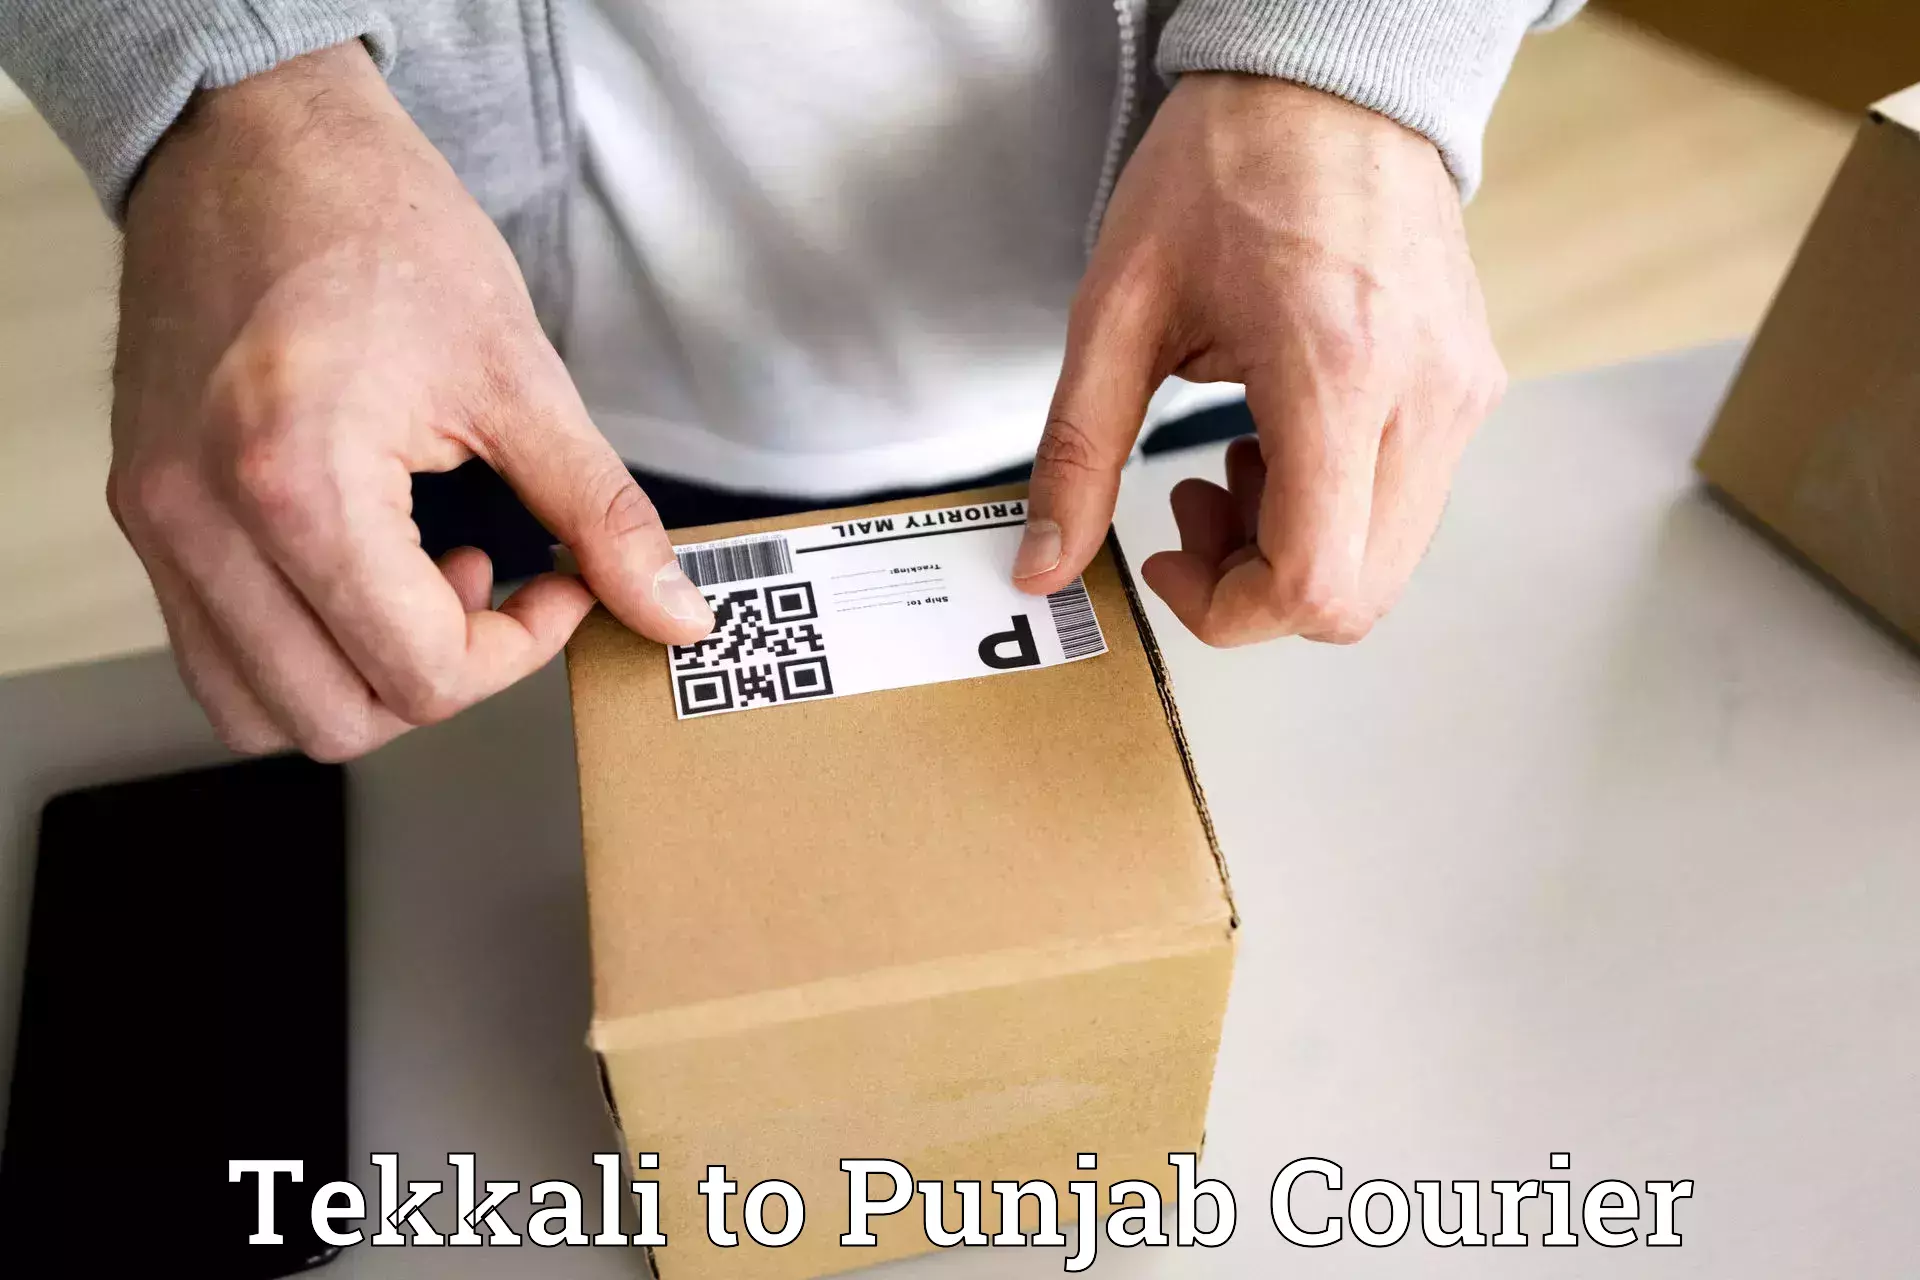 Automated parcel services Tekkali to Jalalabad